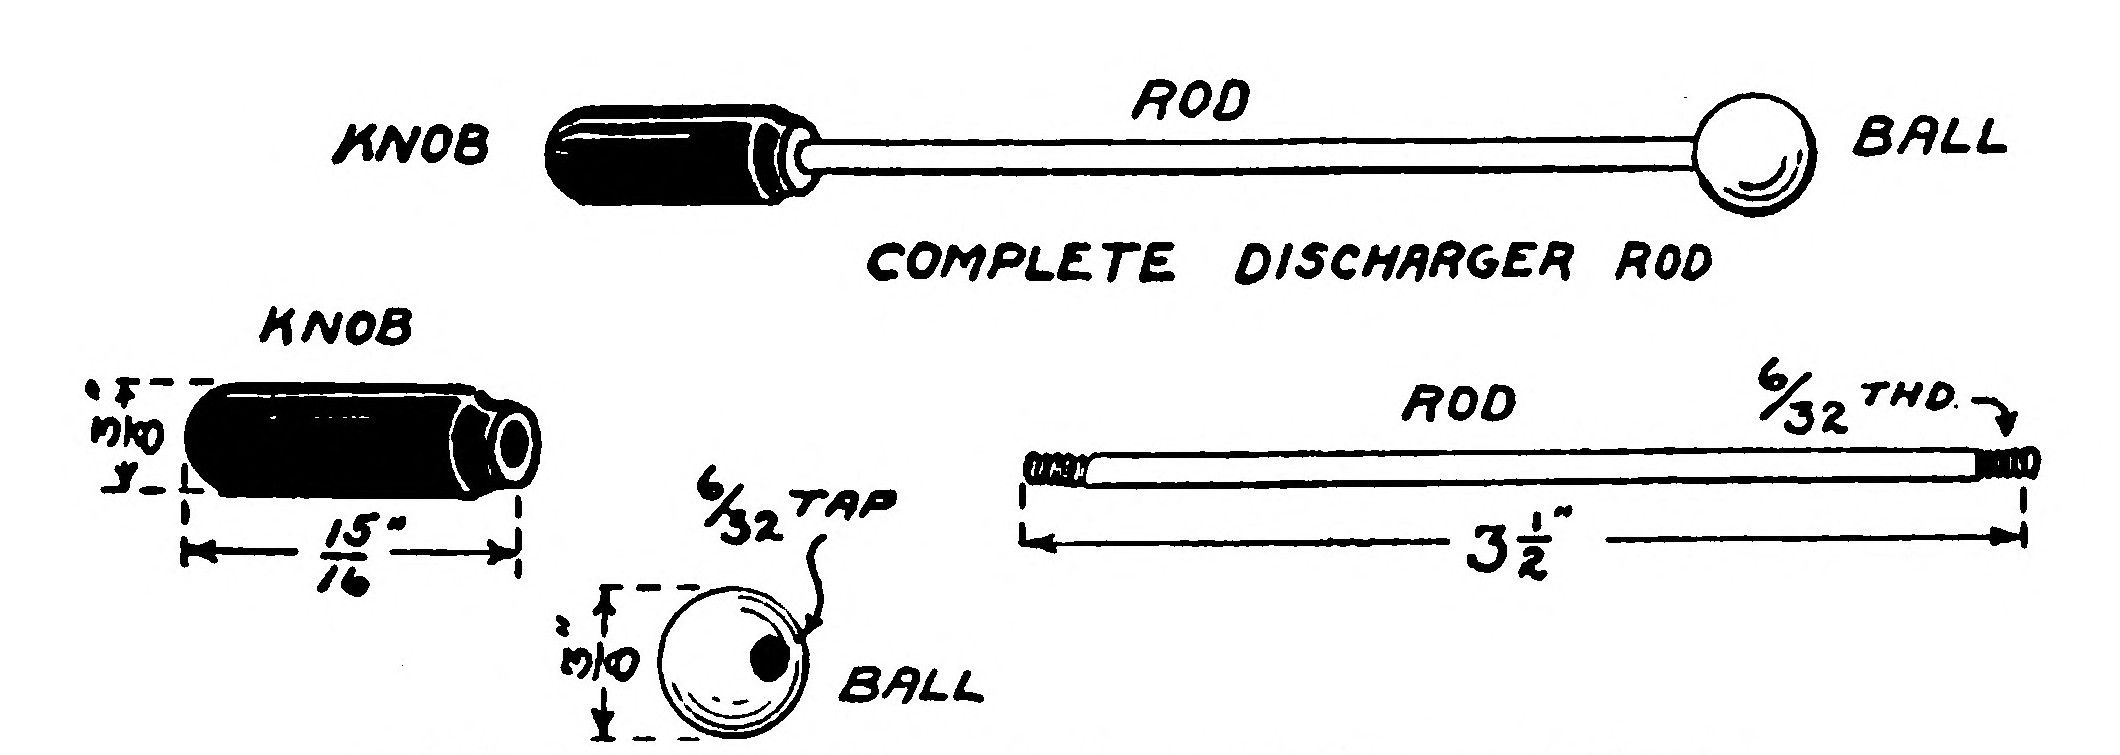 FIG. 12.—Details of the Discharger Rods.